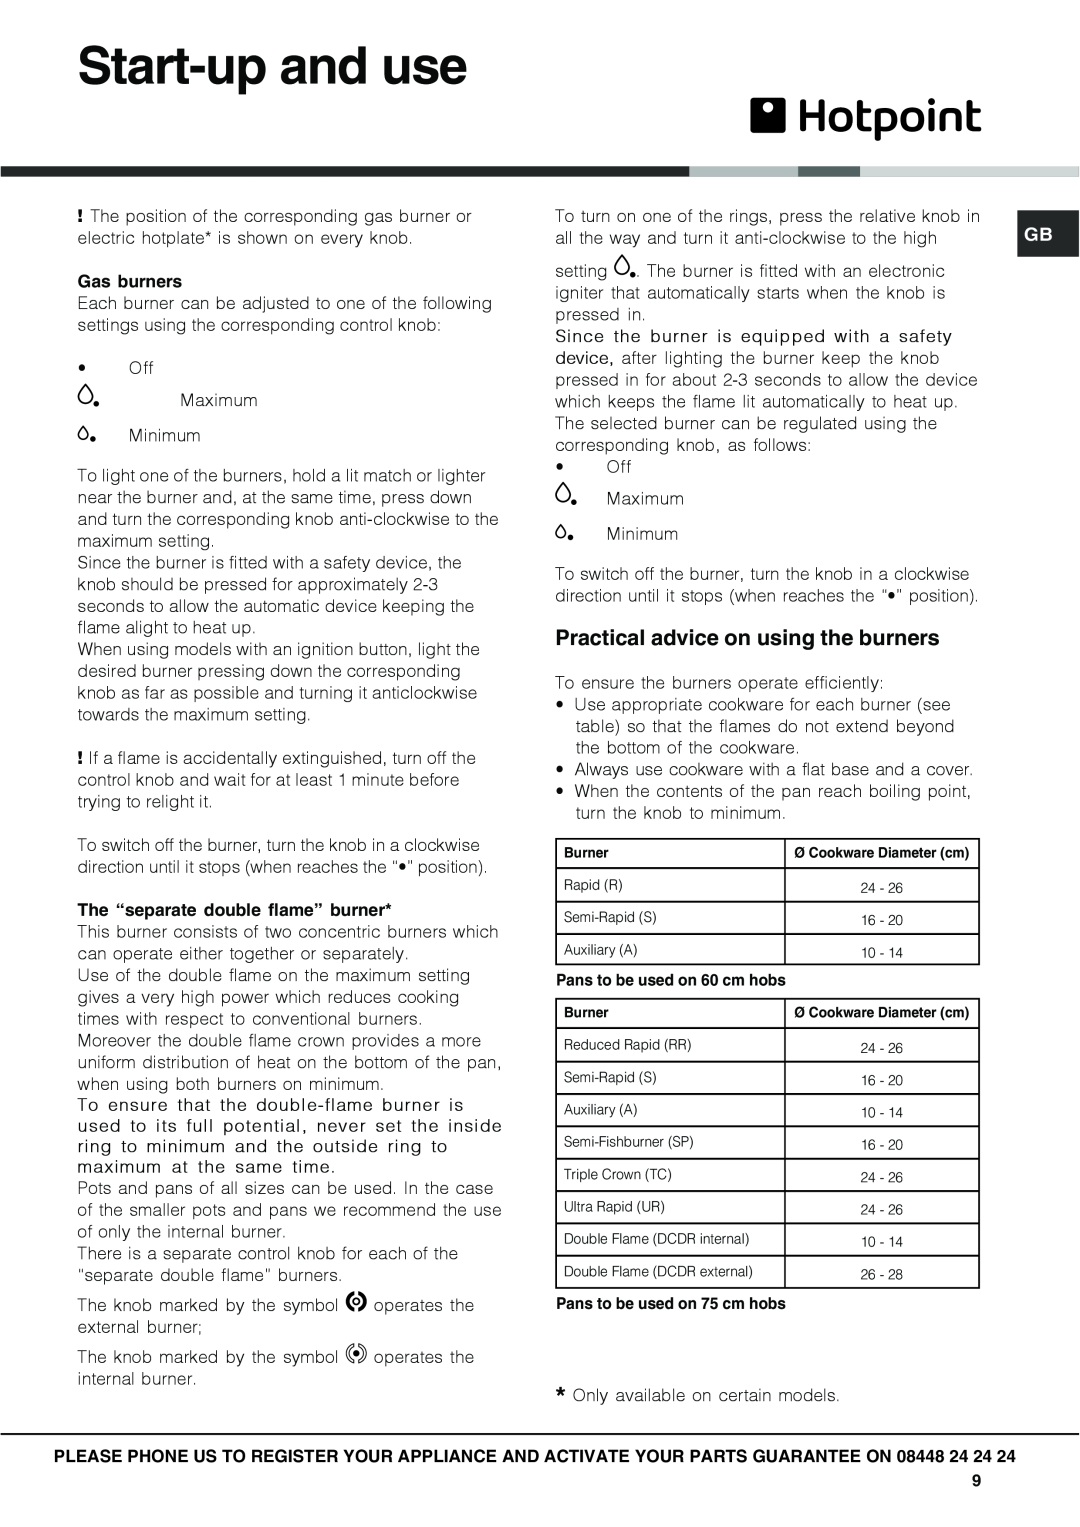 Hotpoint GC640IX specifications Start-upand use, Practical advice on using the burners 